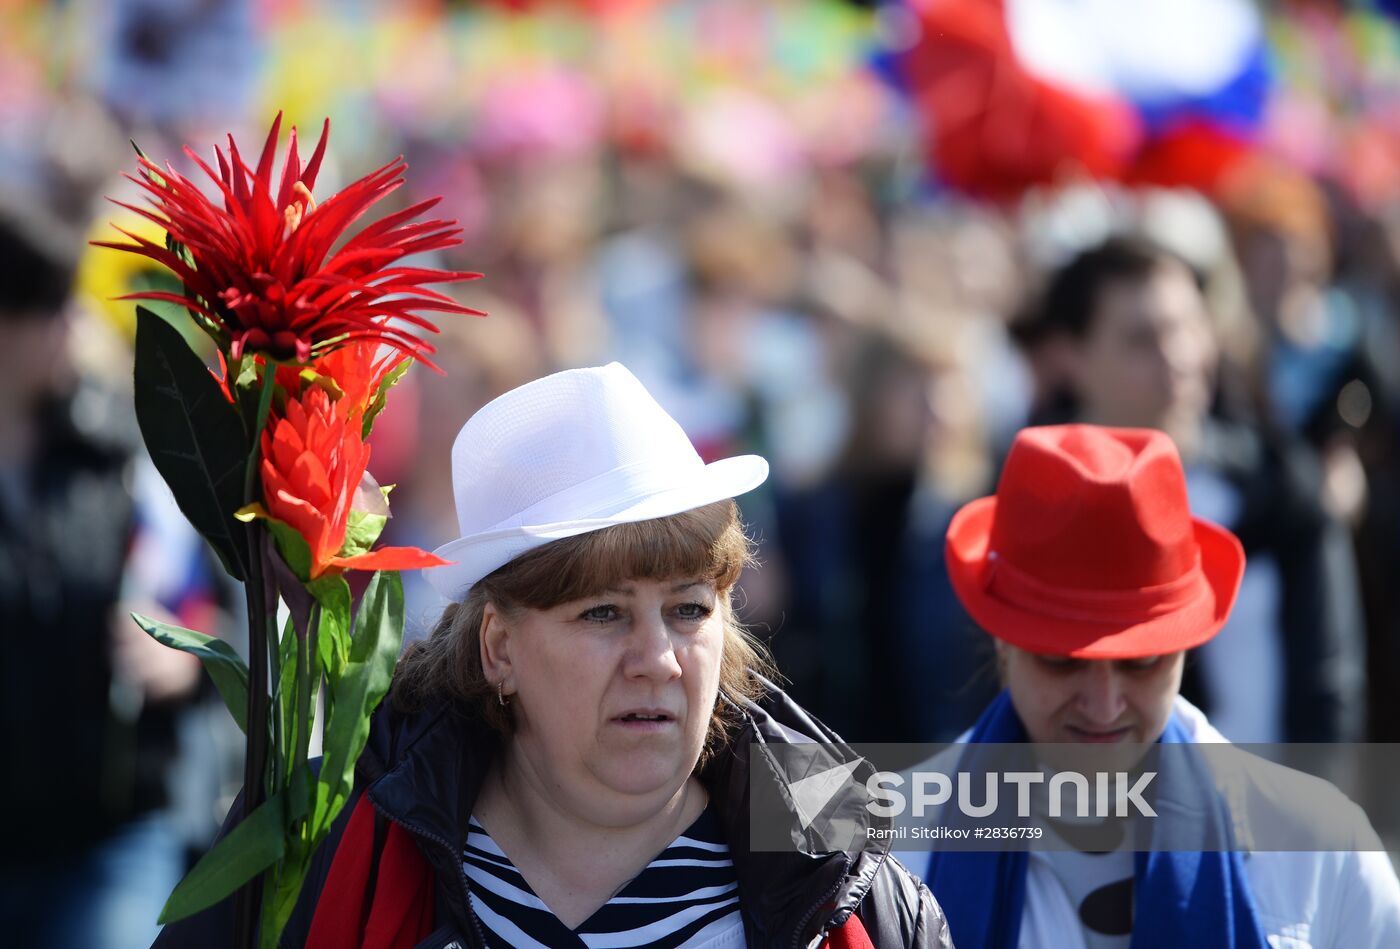 May 1 demonstration on Red Square